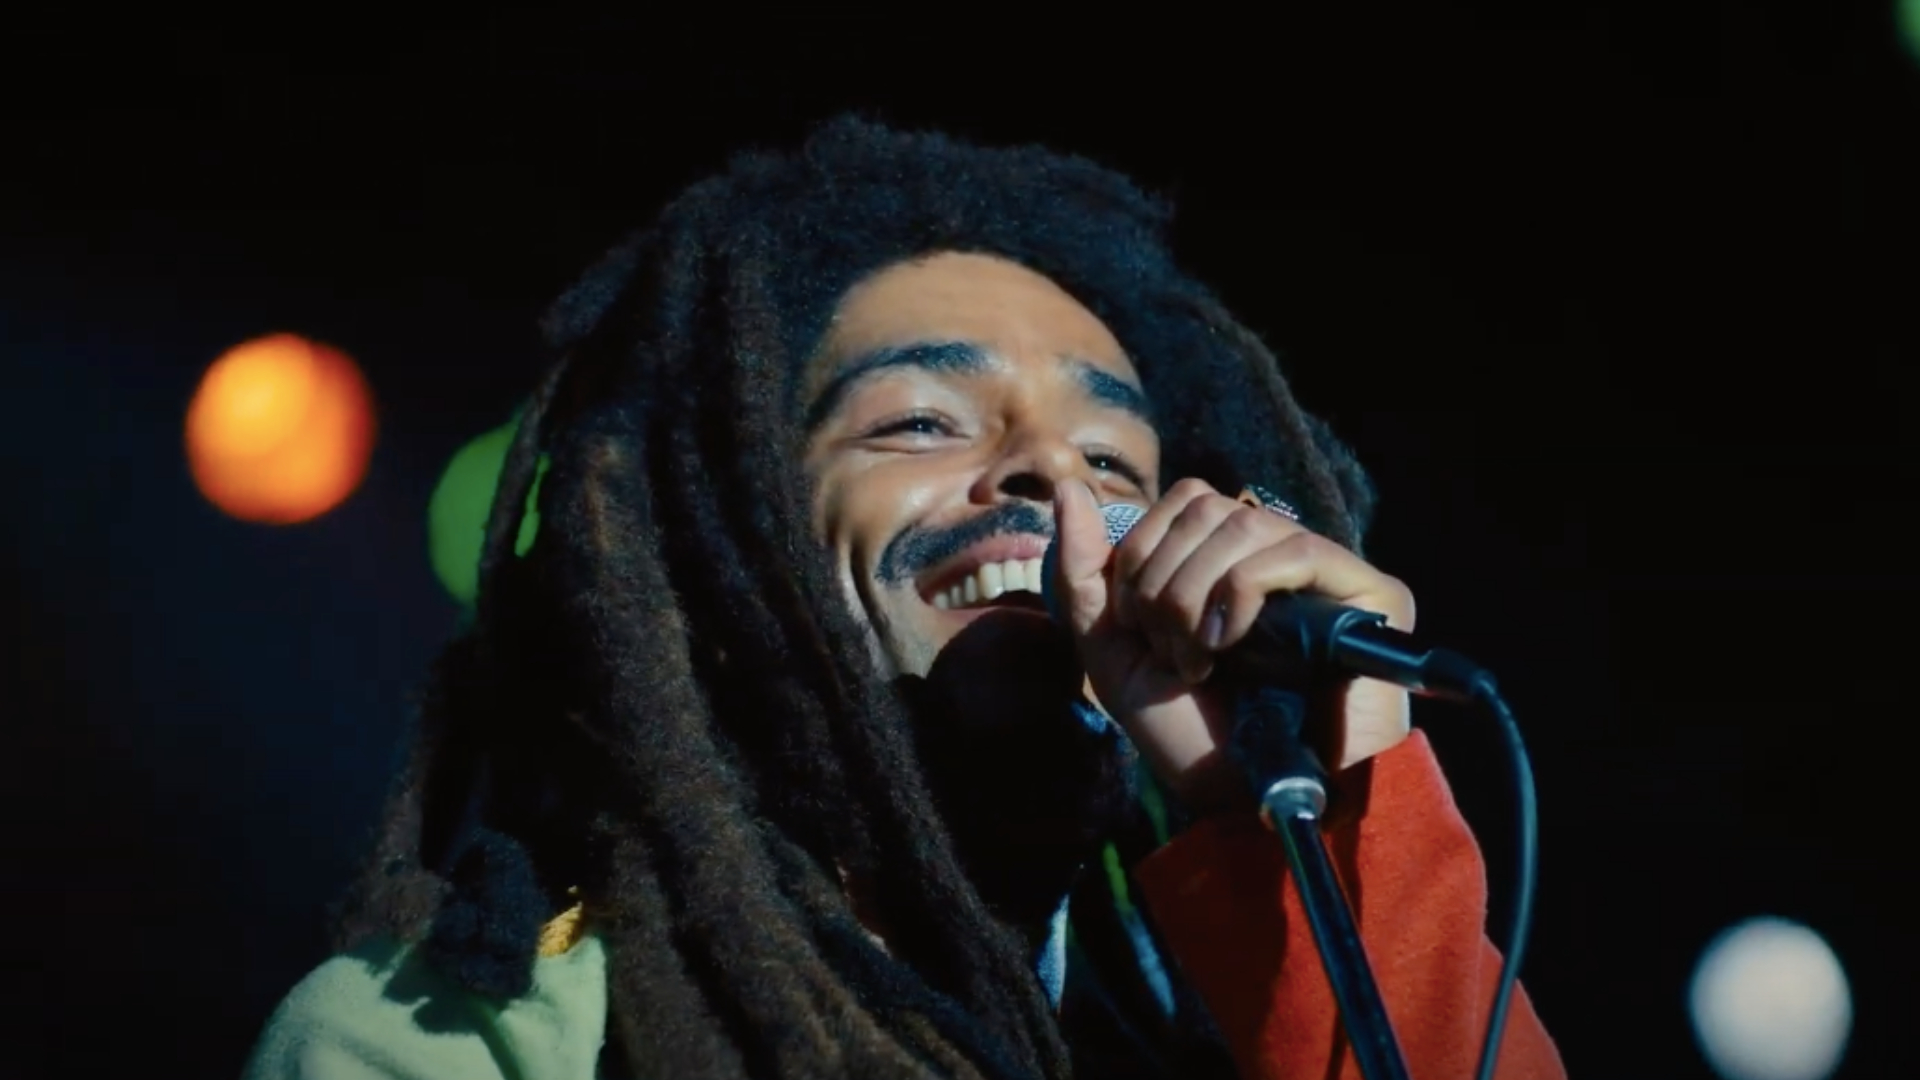 “Bob Marley: One Love” Celebrates The Life And Music Of The Legendary ...